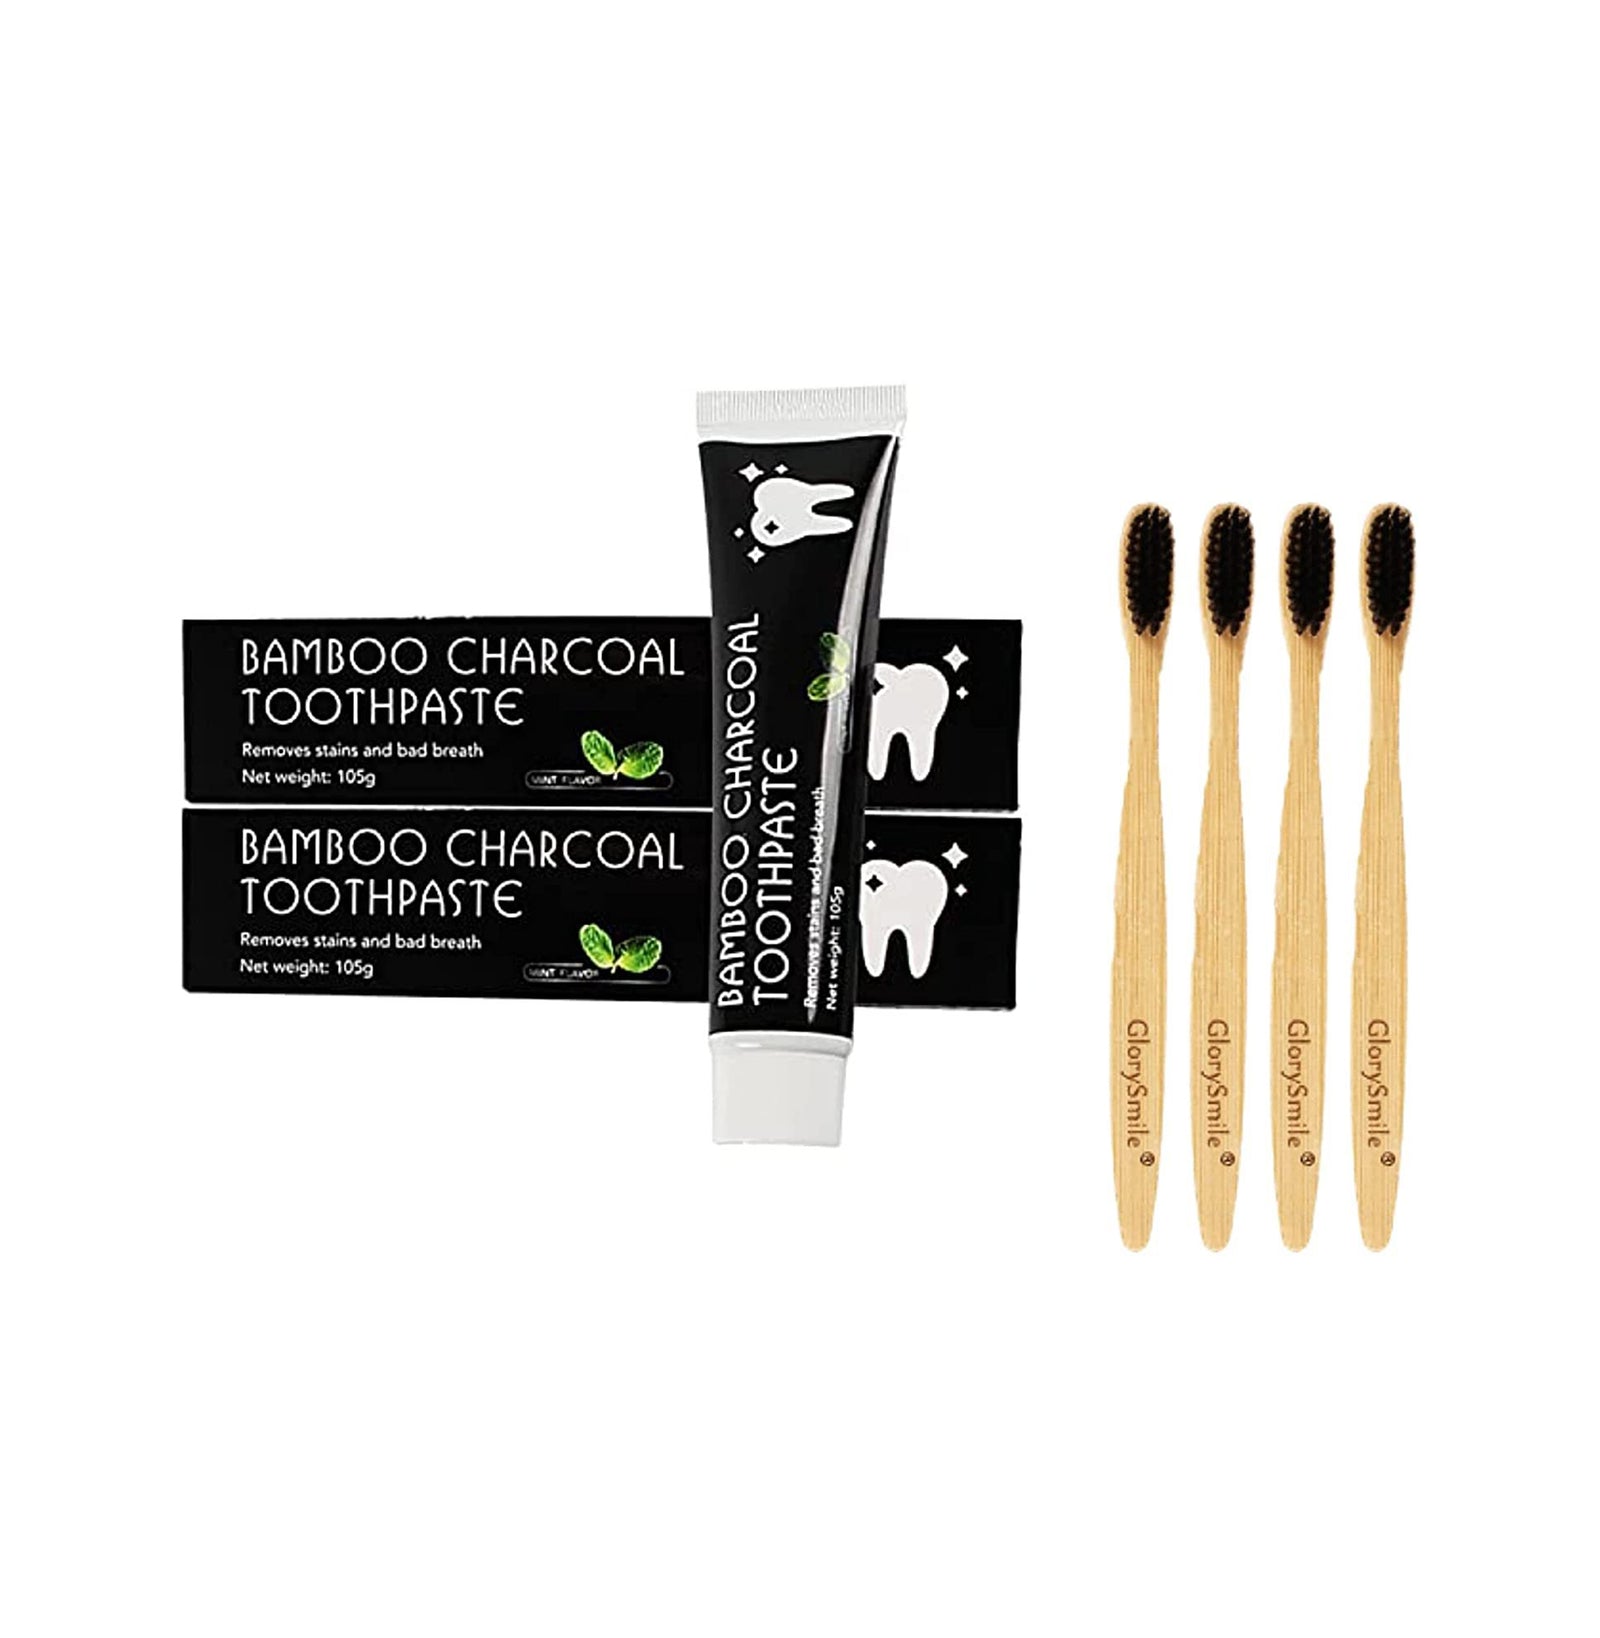 Bamboo Charcoal toothpaste with wooden toothbrush